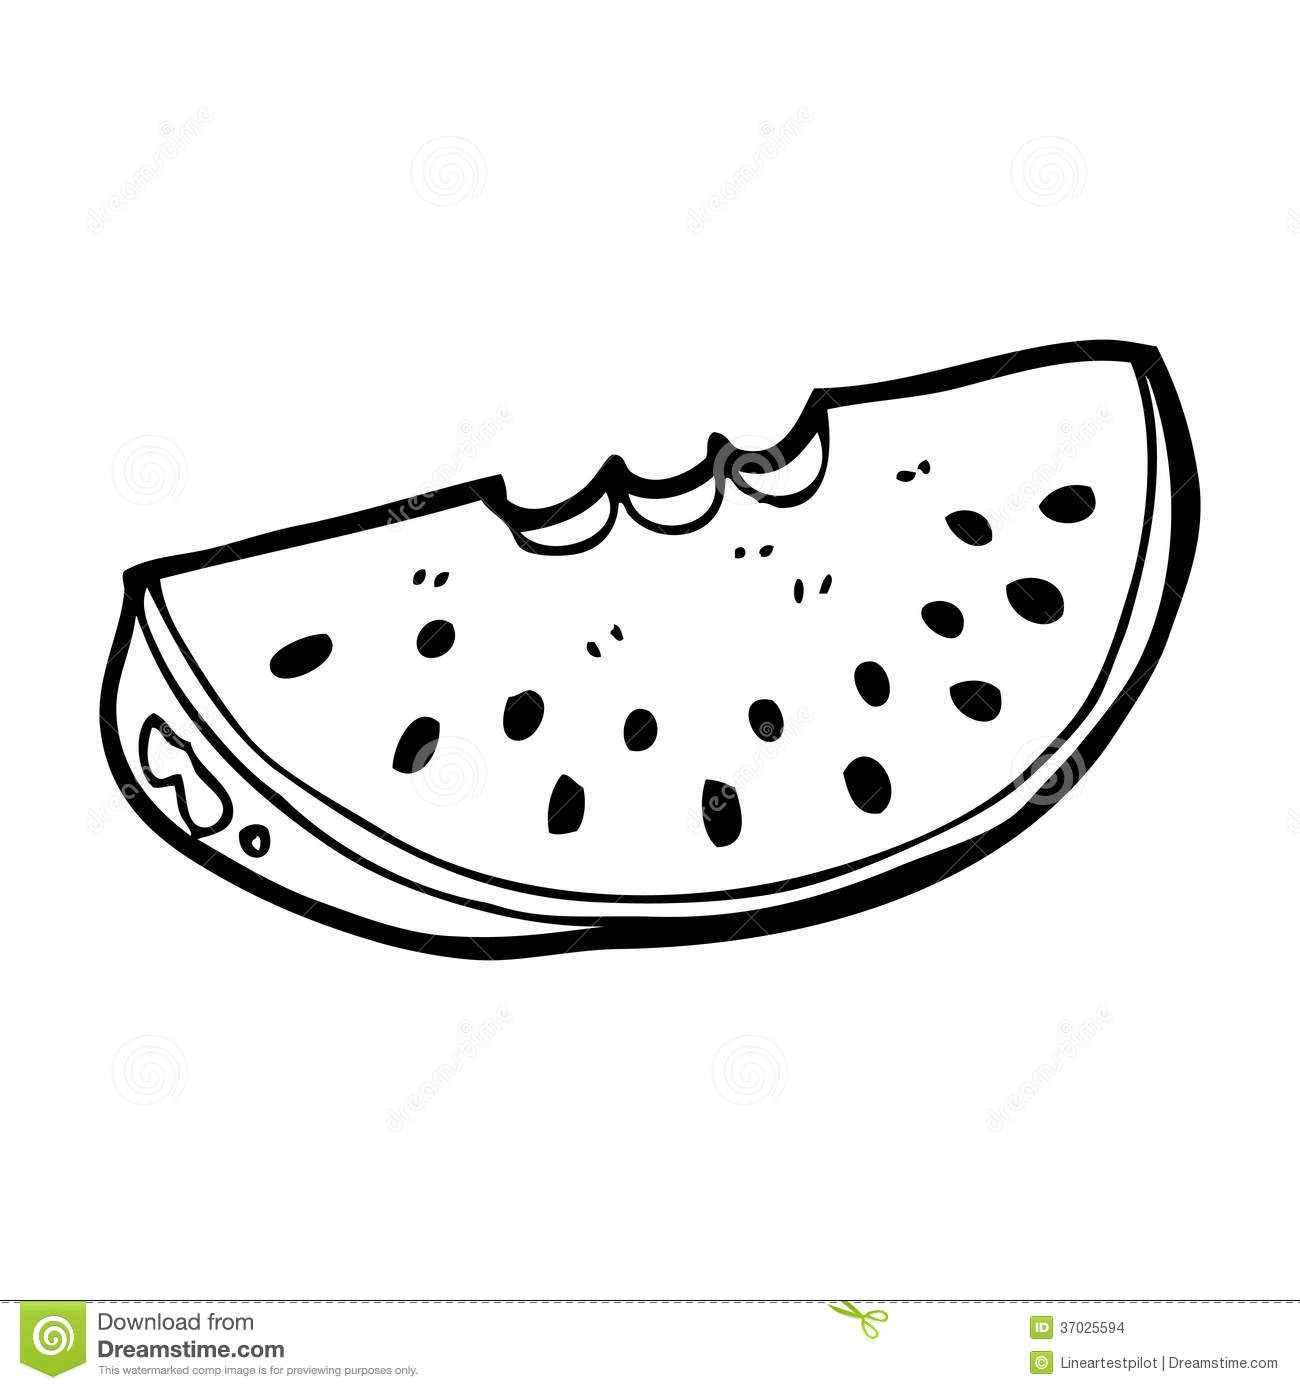 Watermelon Slice Black And White Images   Pictures   Becuo